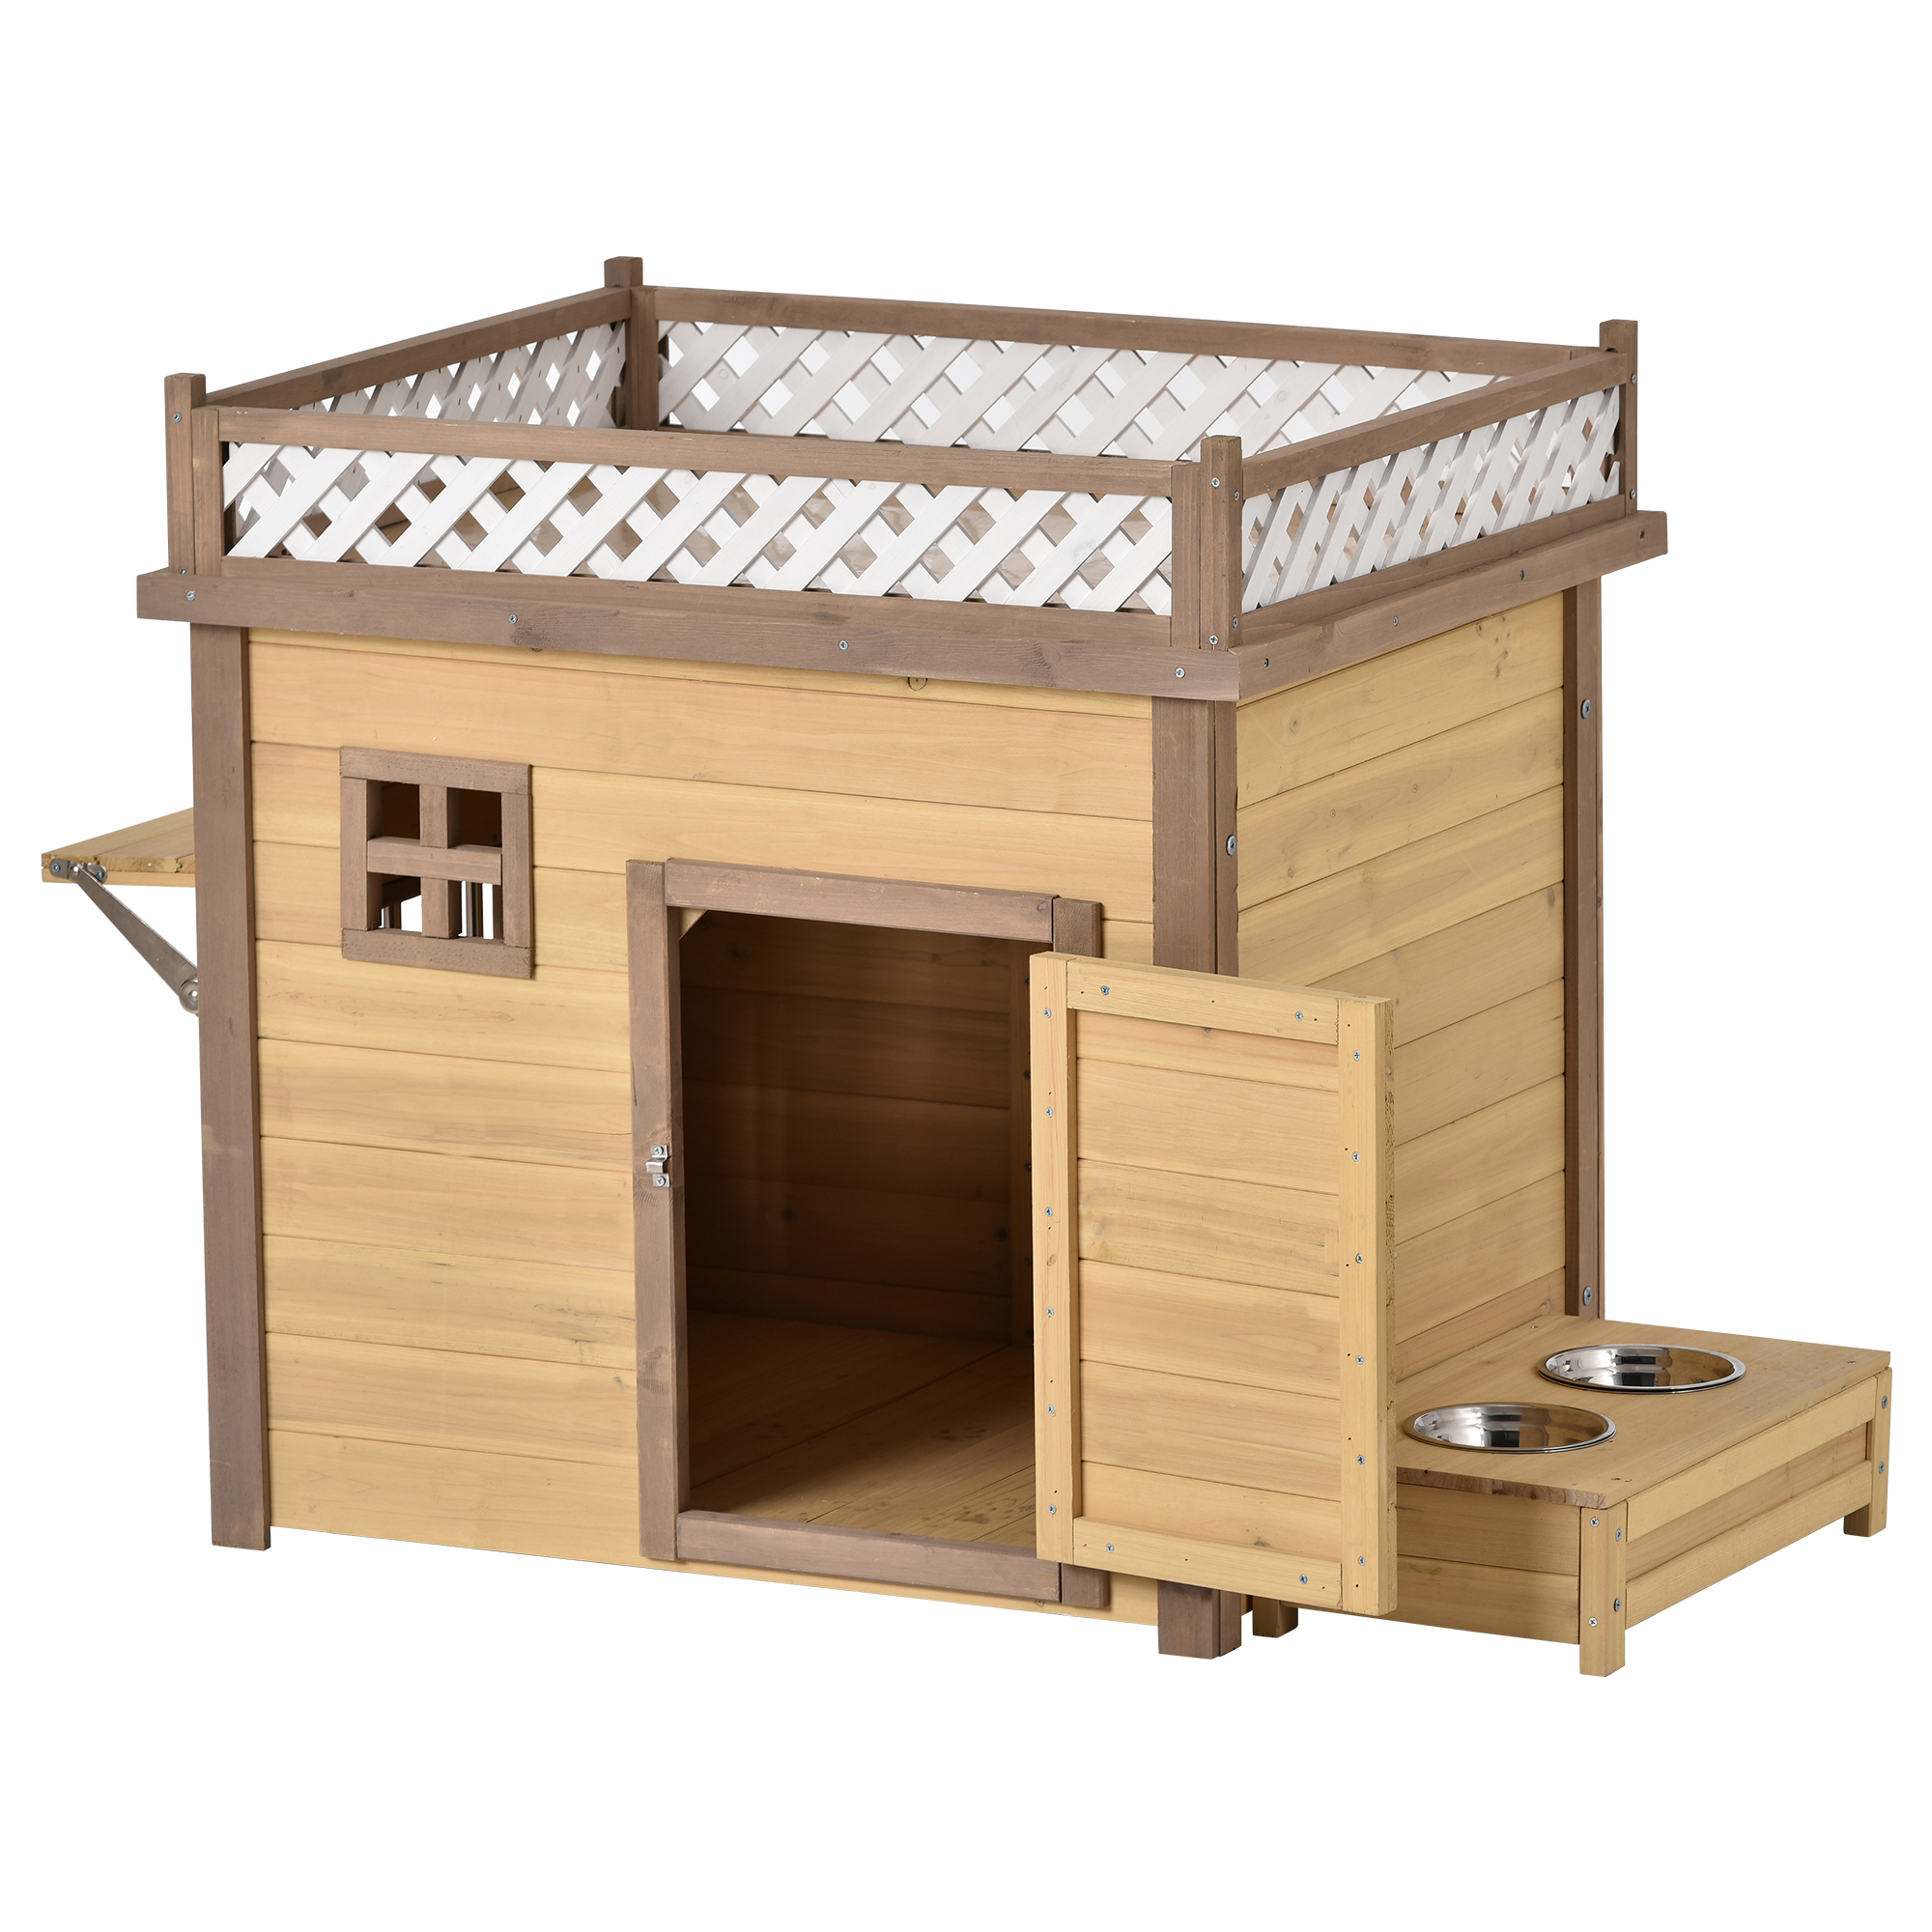 31.5” Wooden Dog House Puppy Shelter Kennel Outdoor & Indoor Dog crate, with Flower Stand, Plant Stand, With Wood Feeder-CASAINC